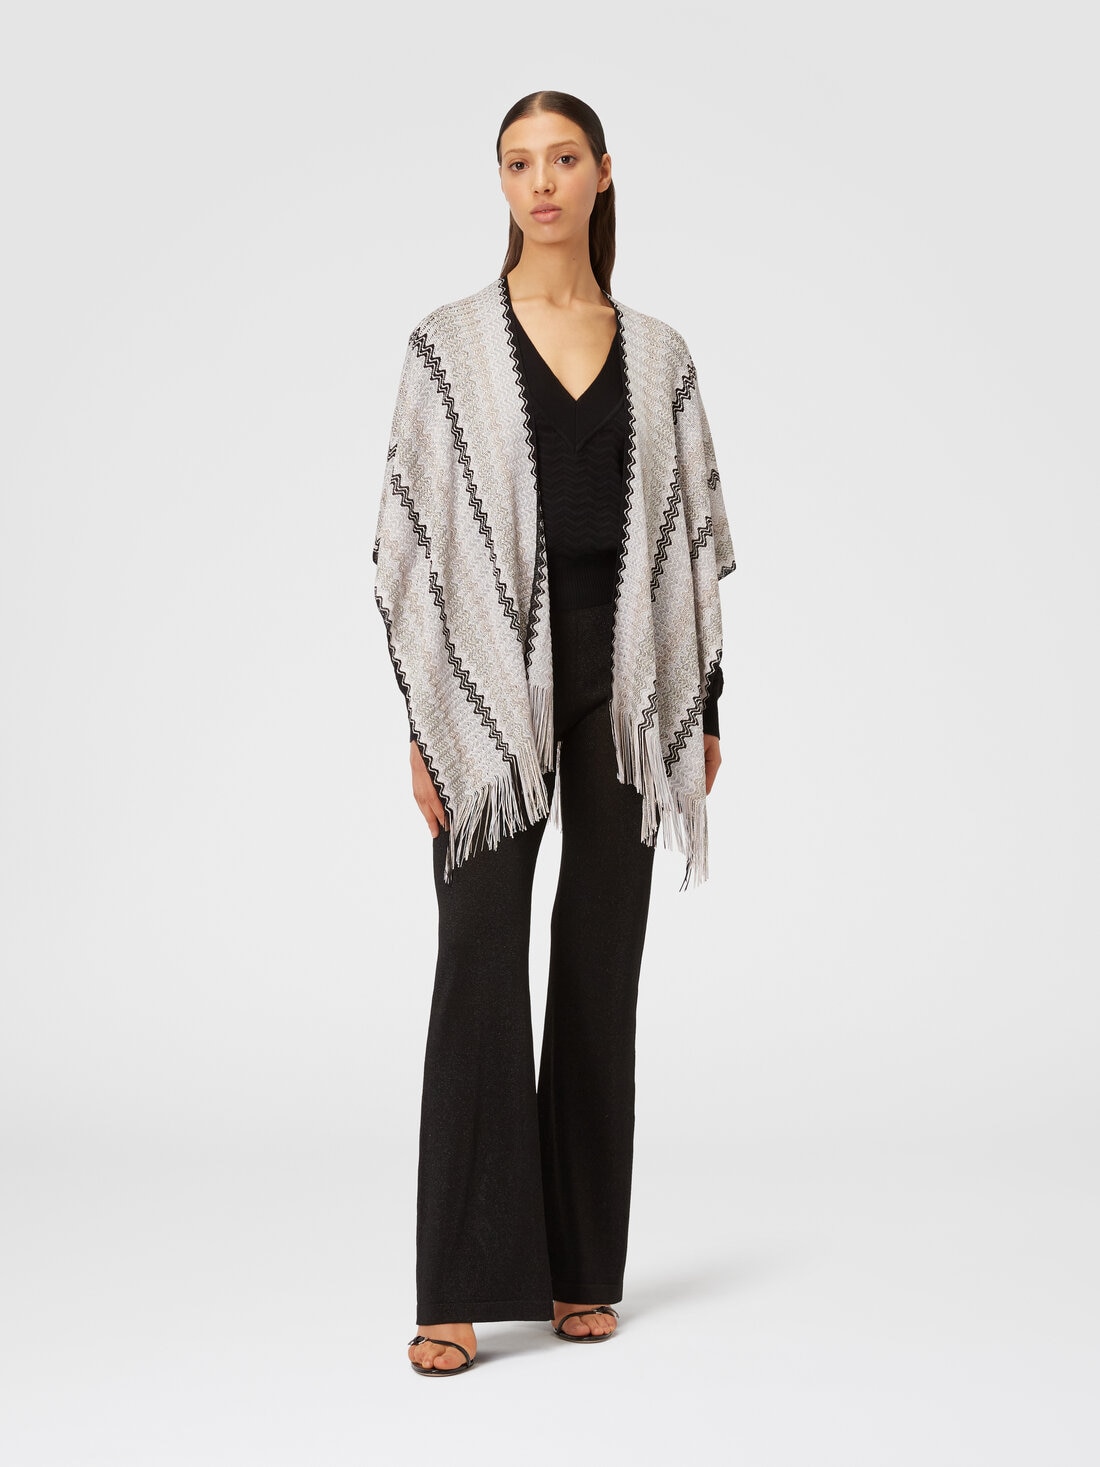 Poncho in viscose blend knit with wave pattern and fringes, Multicoloured  - 8053147141213 - 1